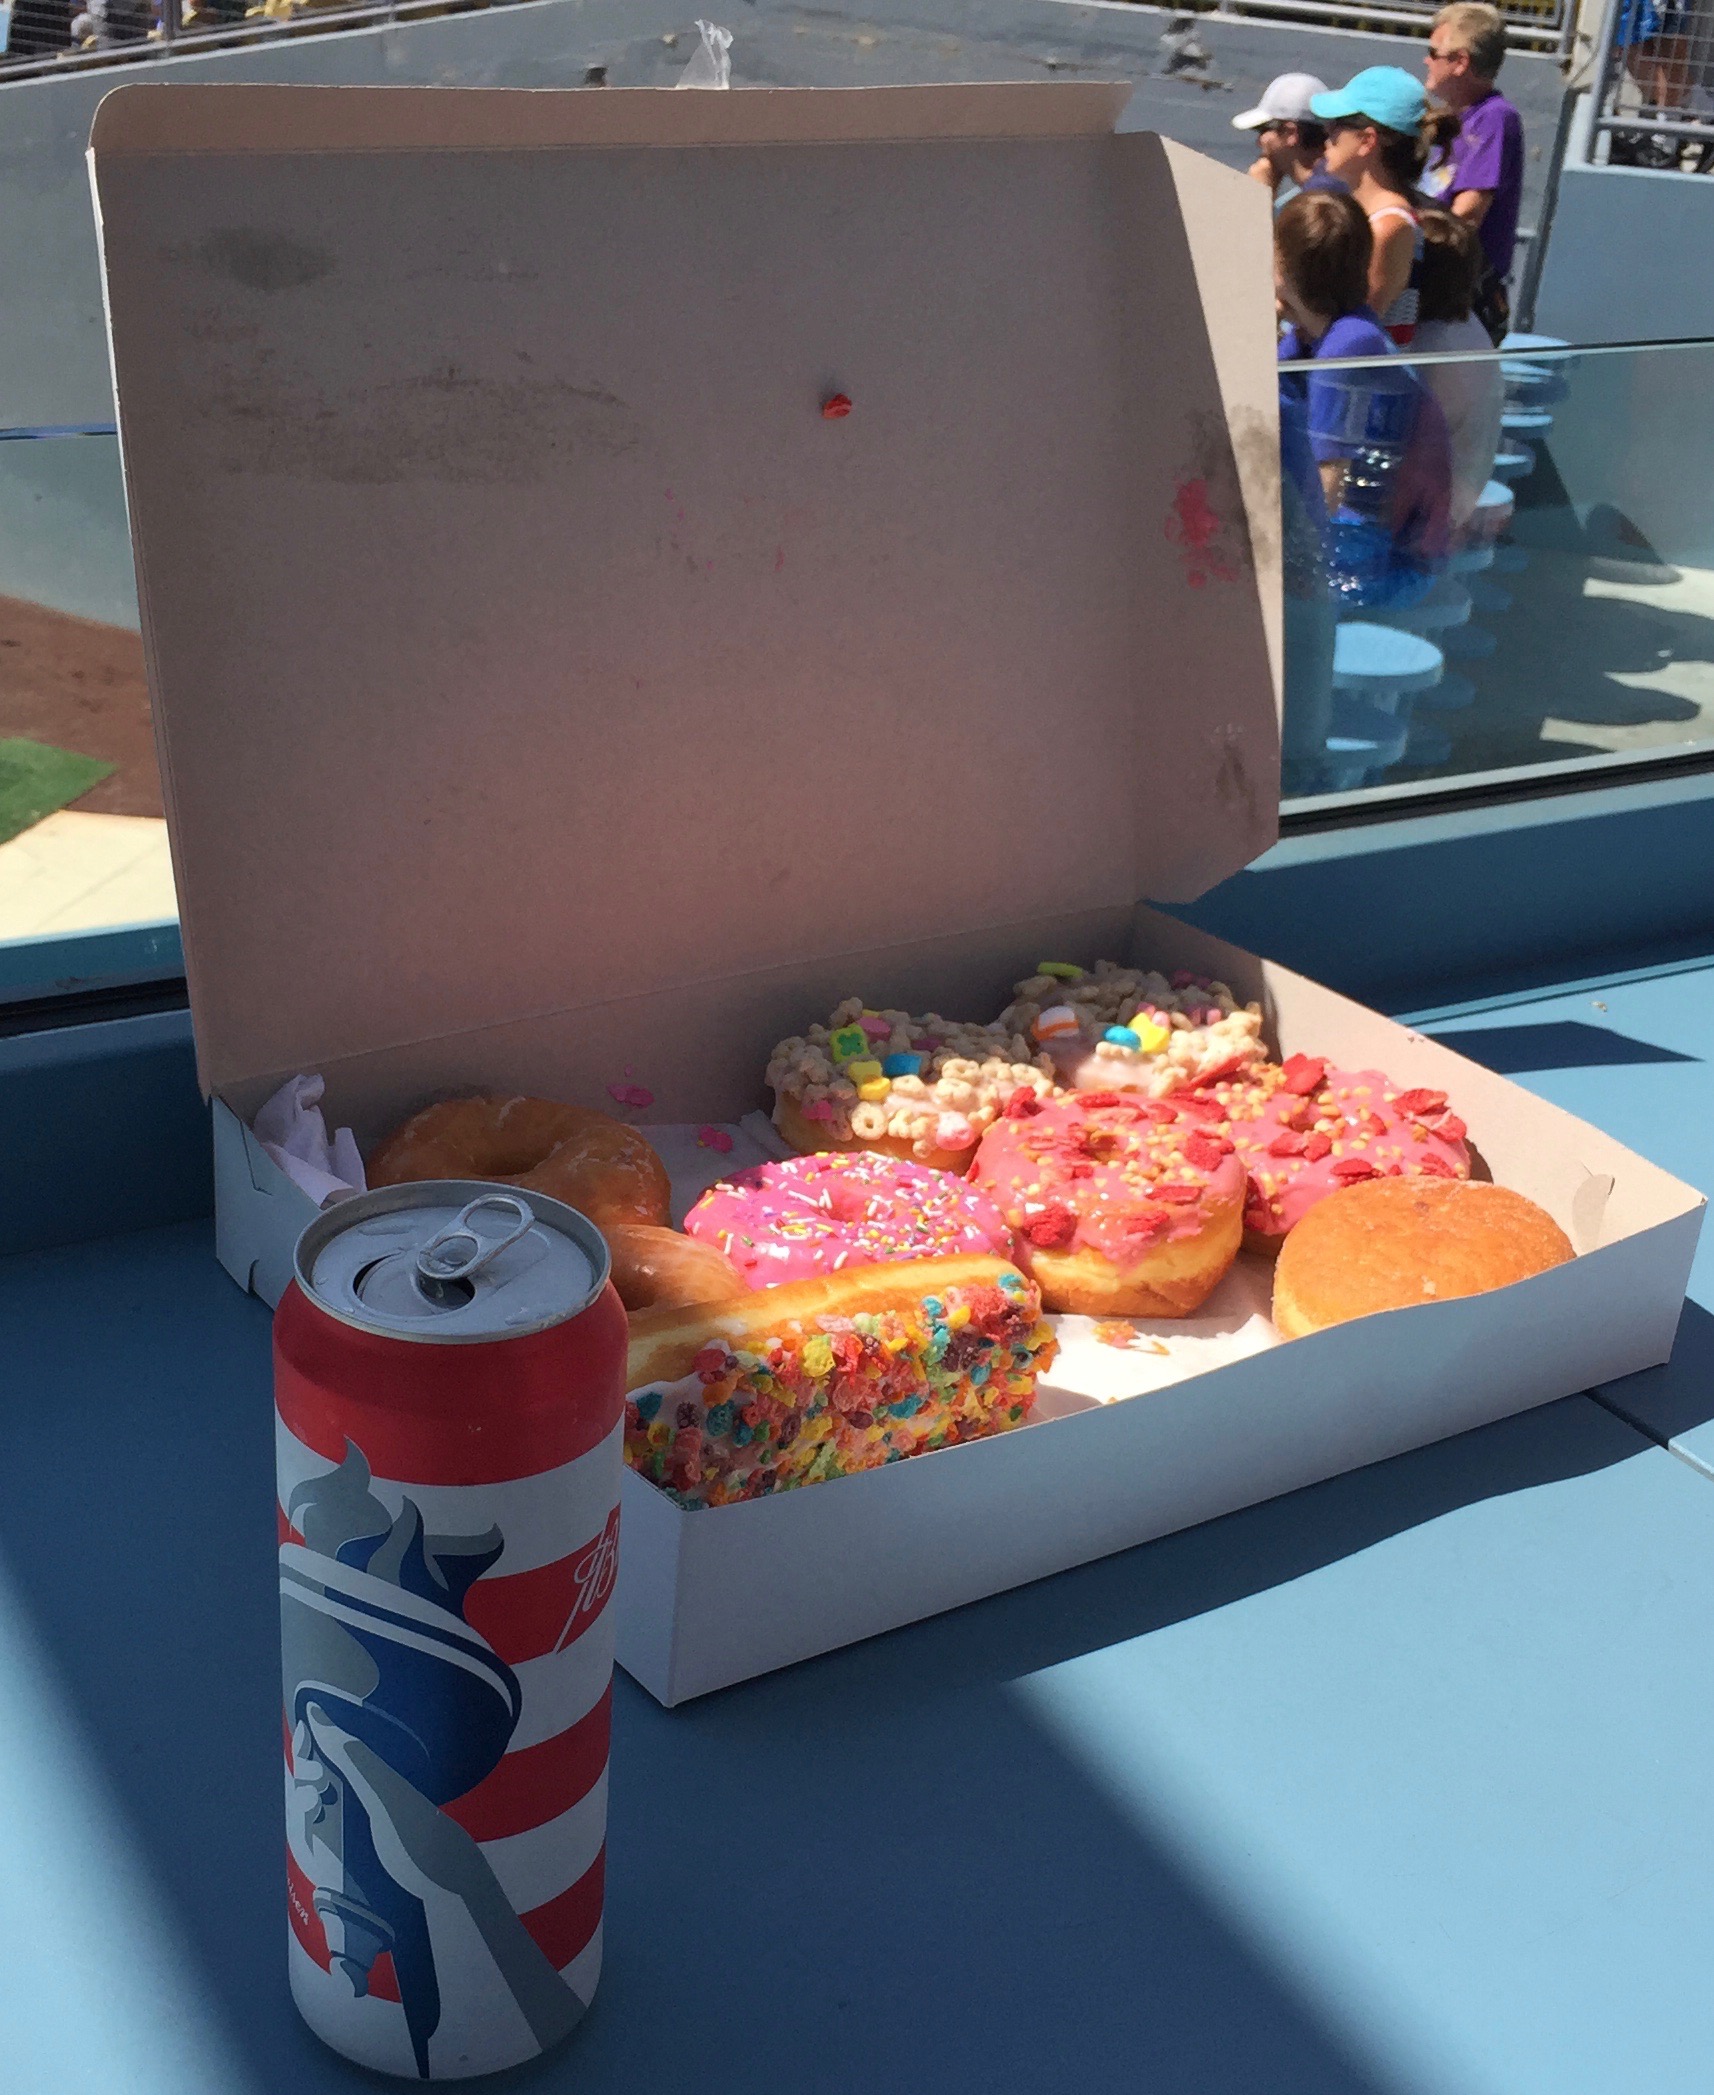 BULLPEN BEER AND DONUTS